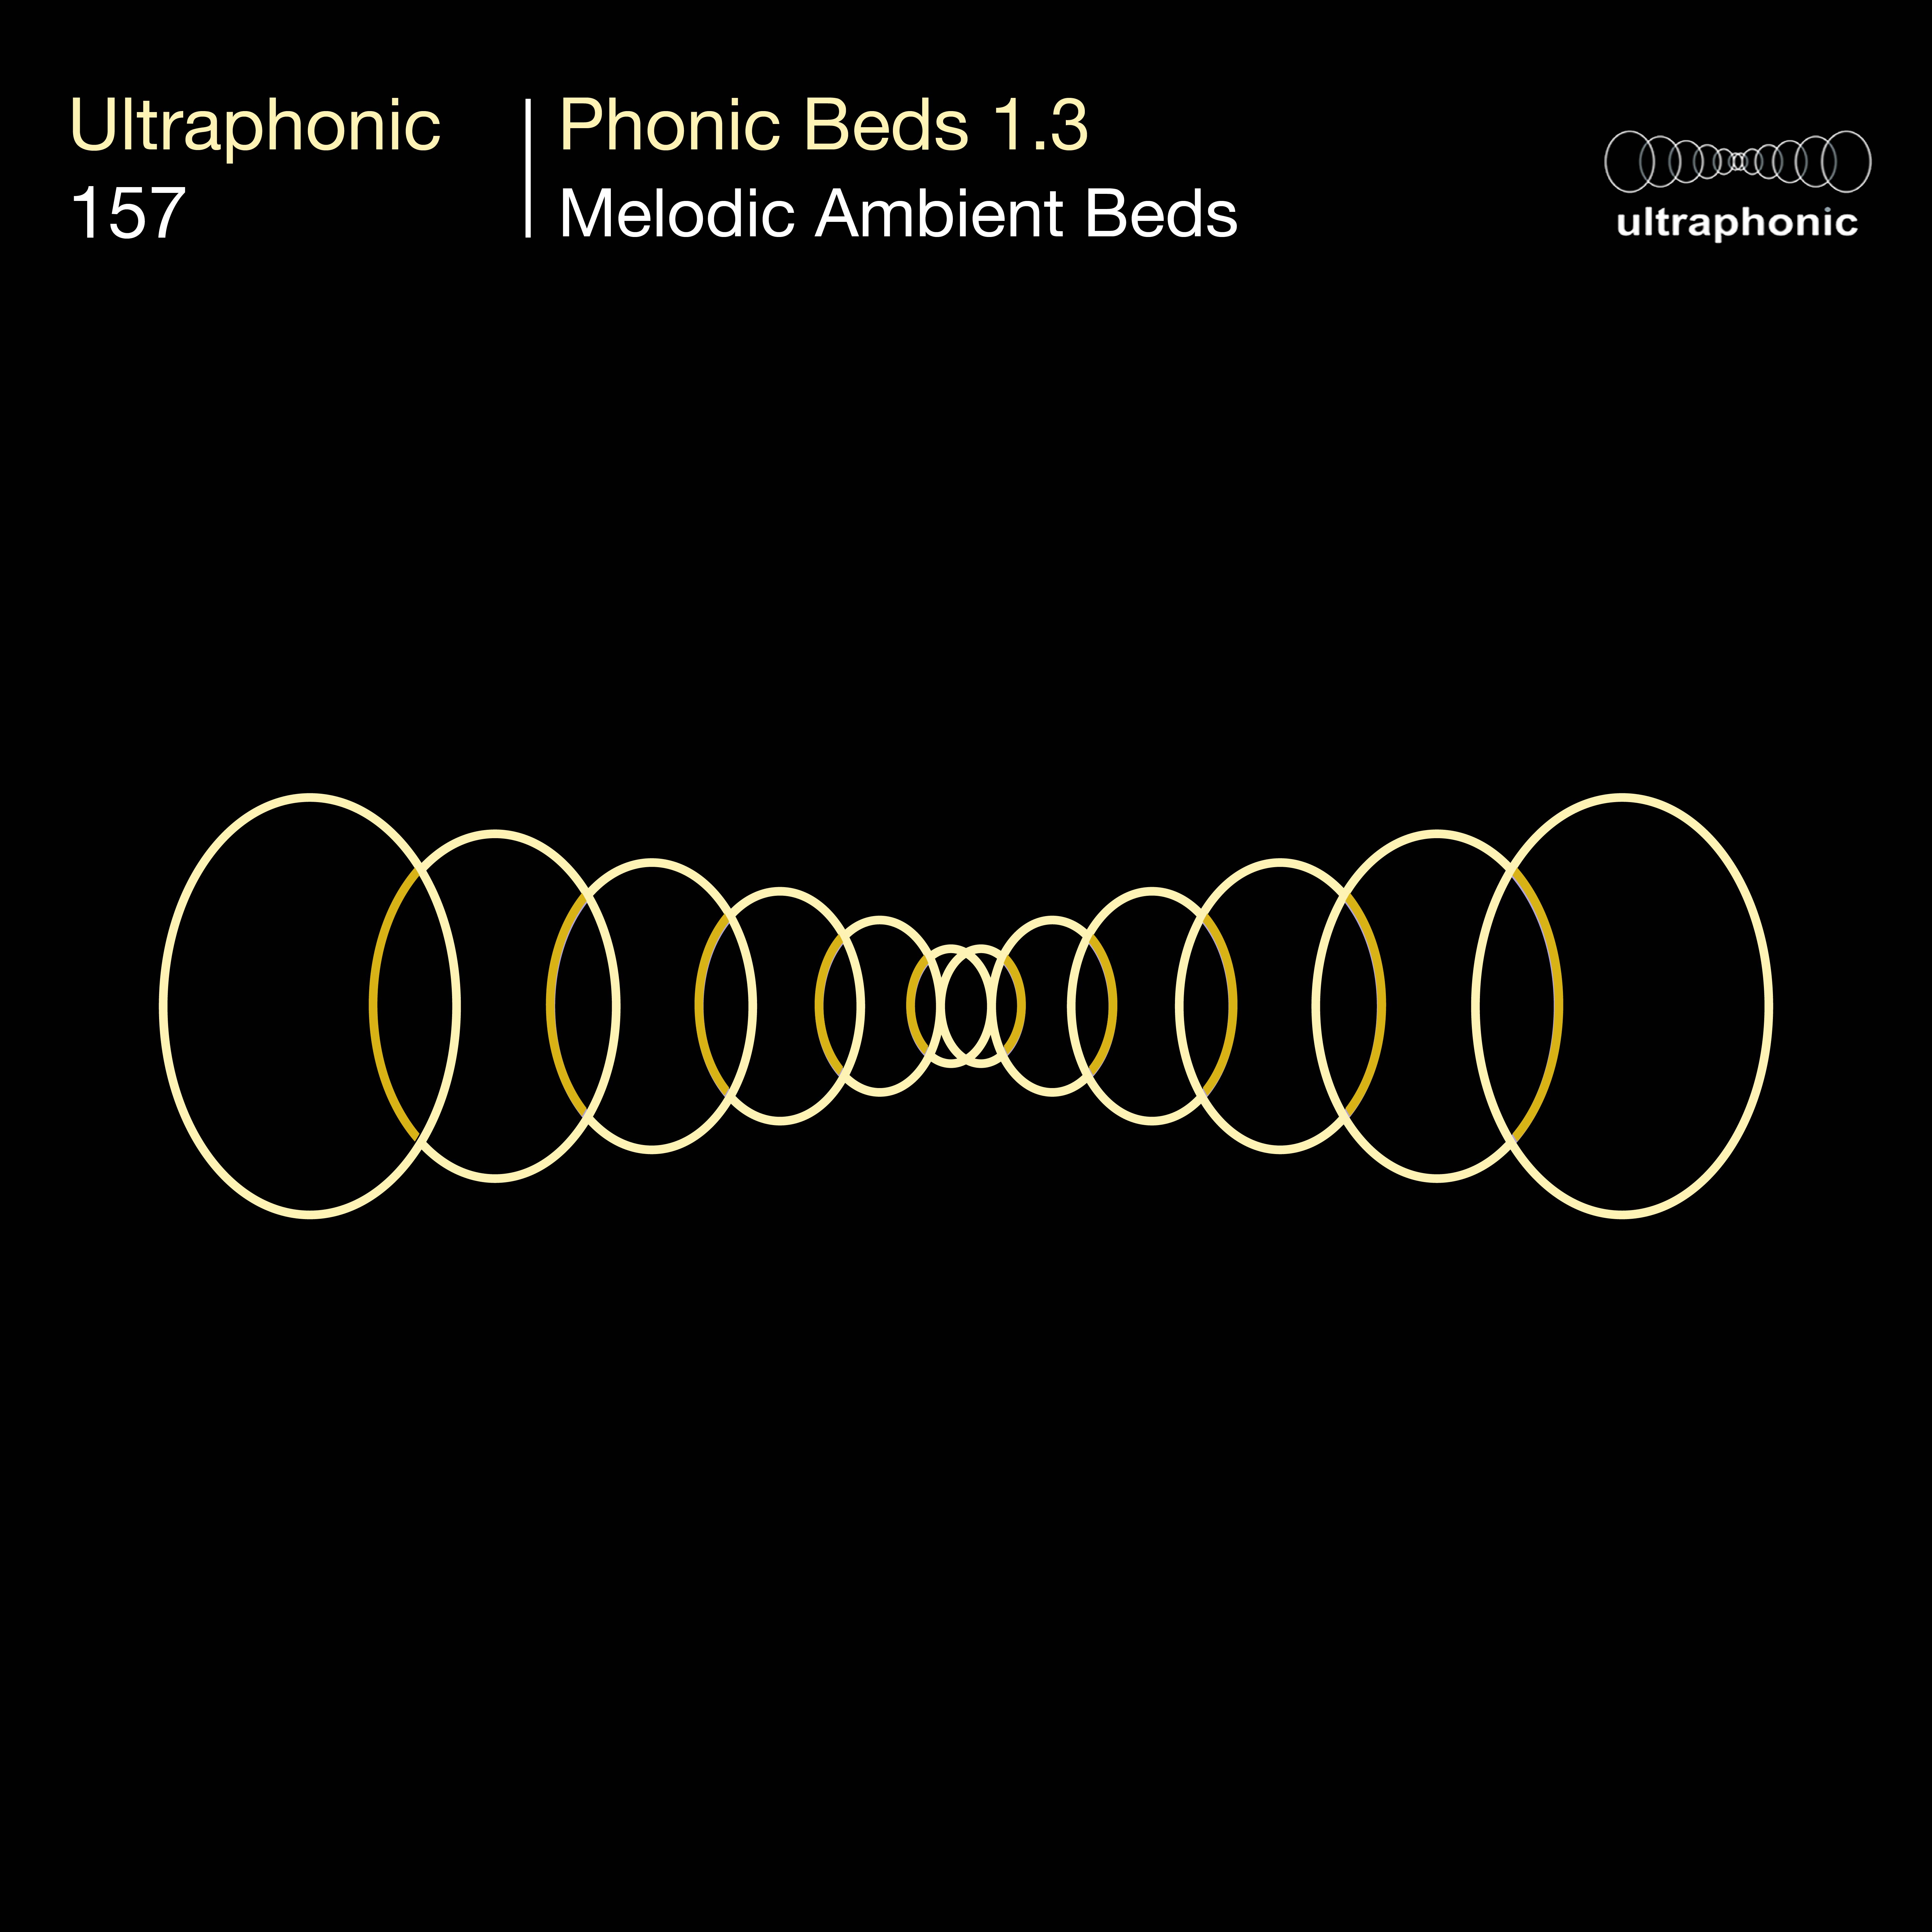 Phonic Beds 1.3